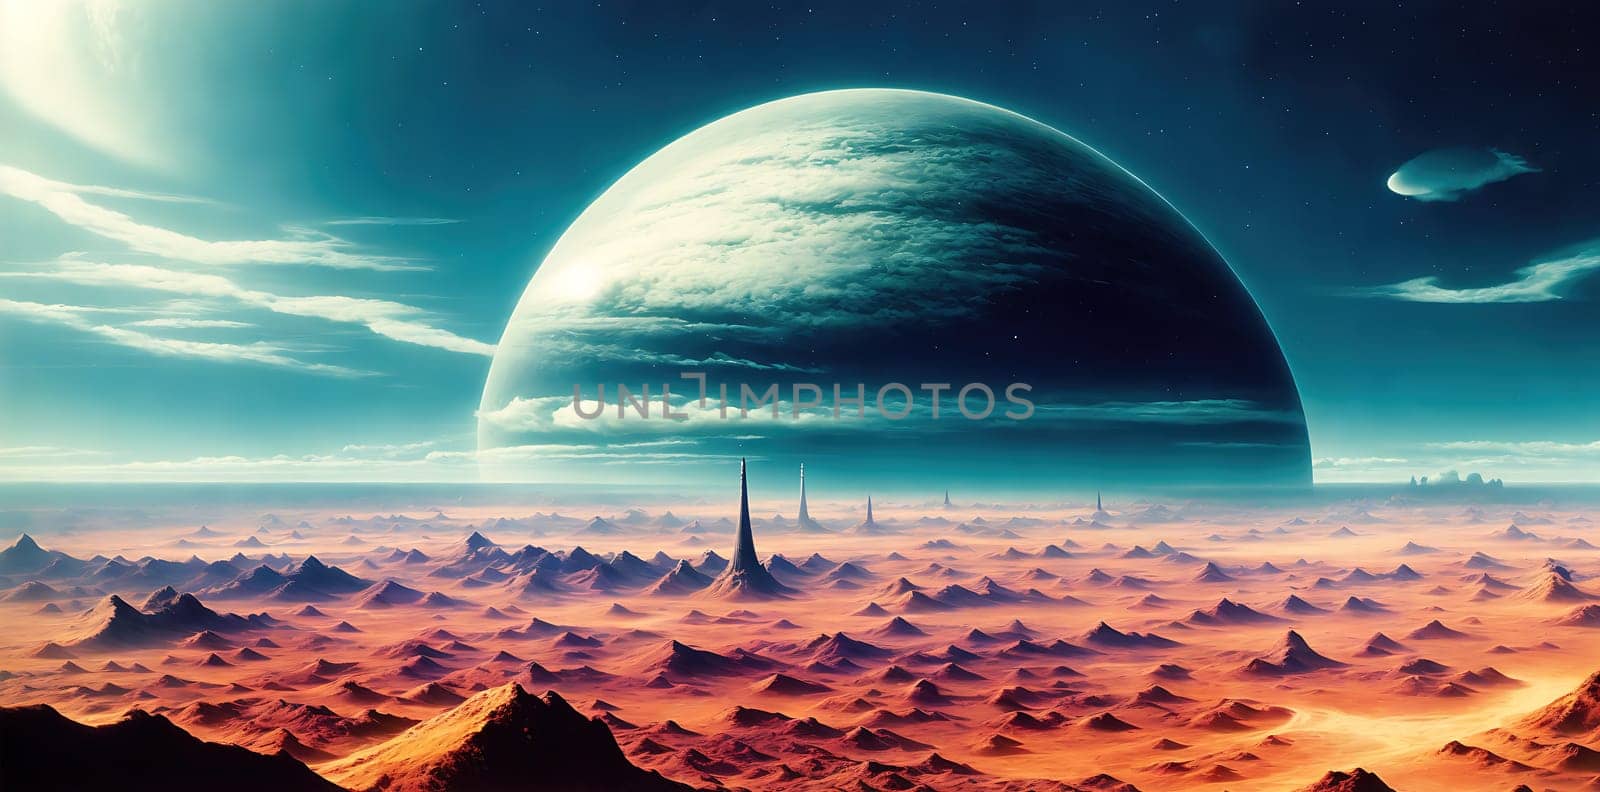 The image depicts a barren, rocky landscape with a large, glowing planet in the background.